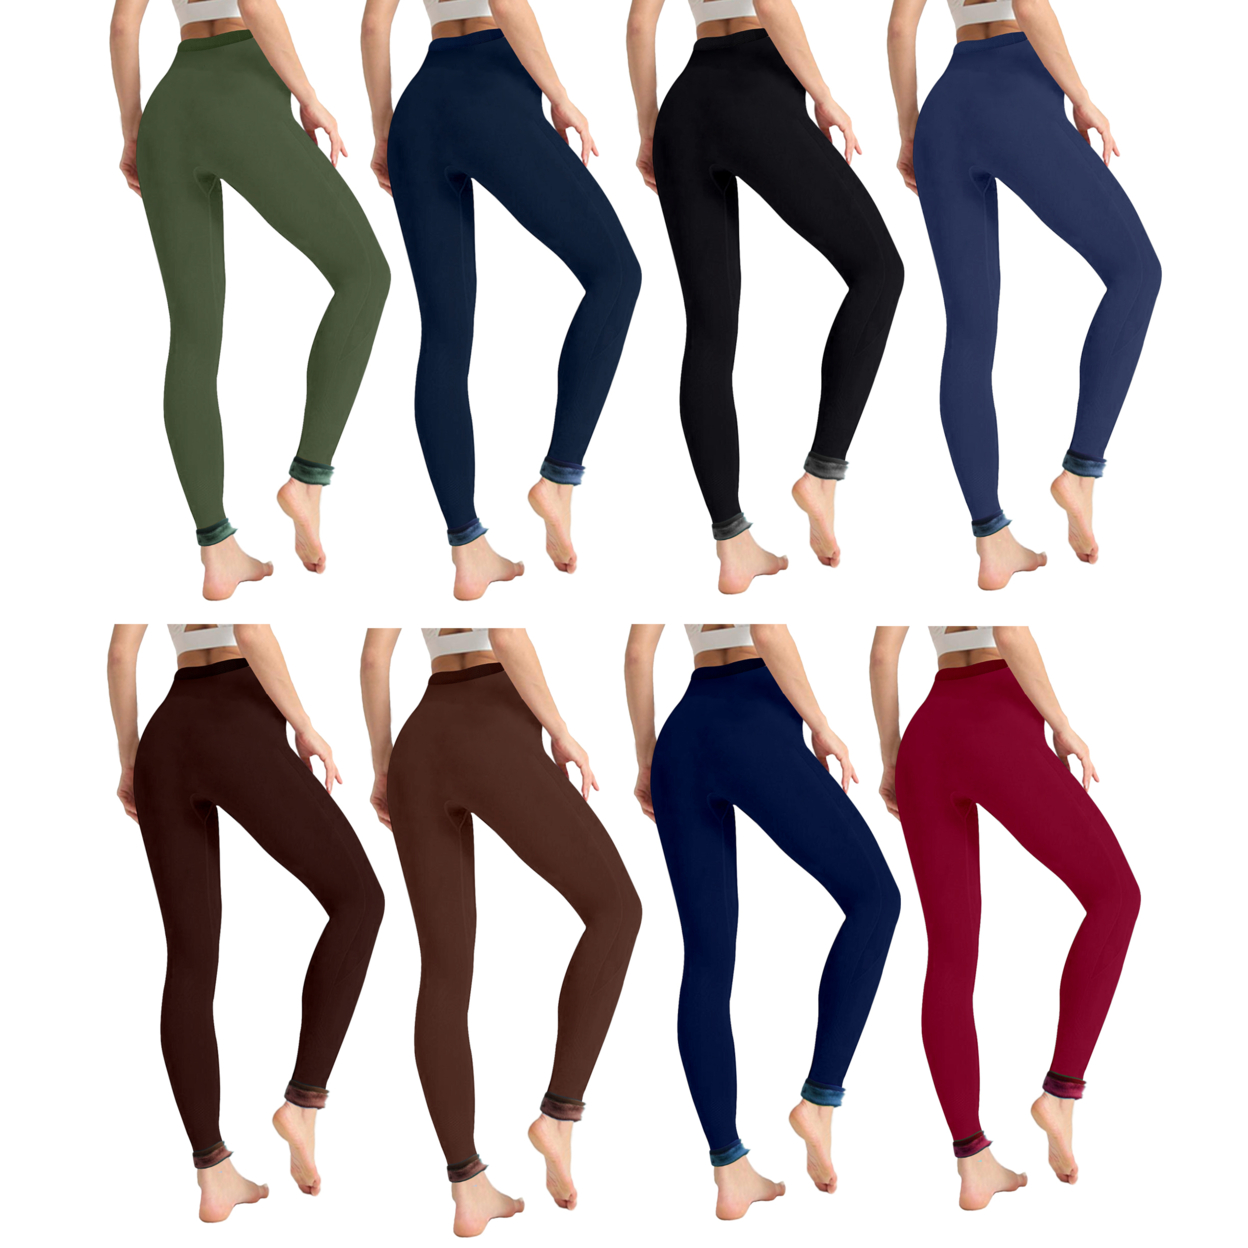 4-Pack: Women's Winter Warm Thick Fur Lined Thermal Leggings (S-2XL) - Assorted, Large/X-Large